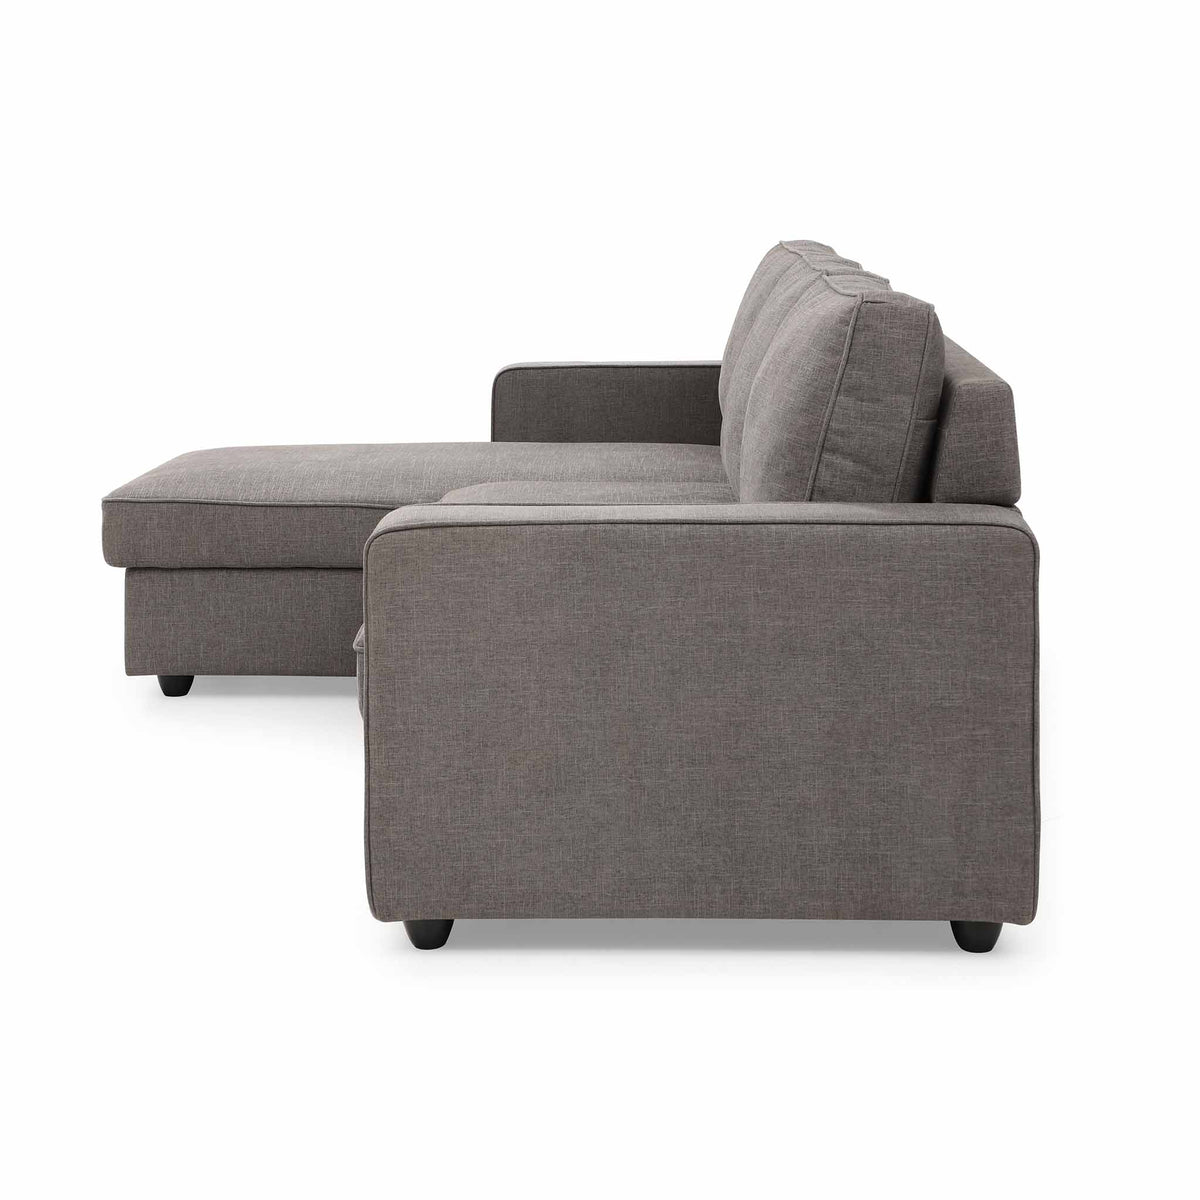 side view of the Soldier Grey 3 Seater Corner Sofa Bed from Roseland Furniture